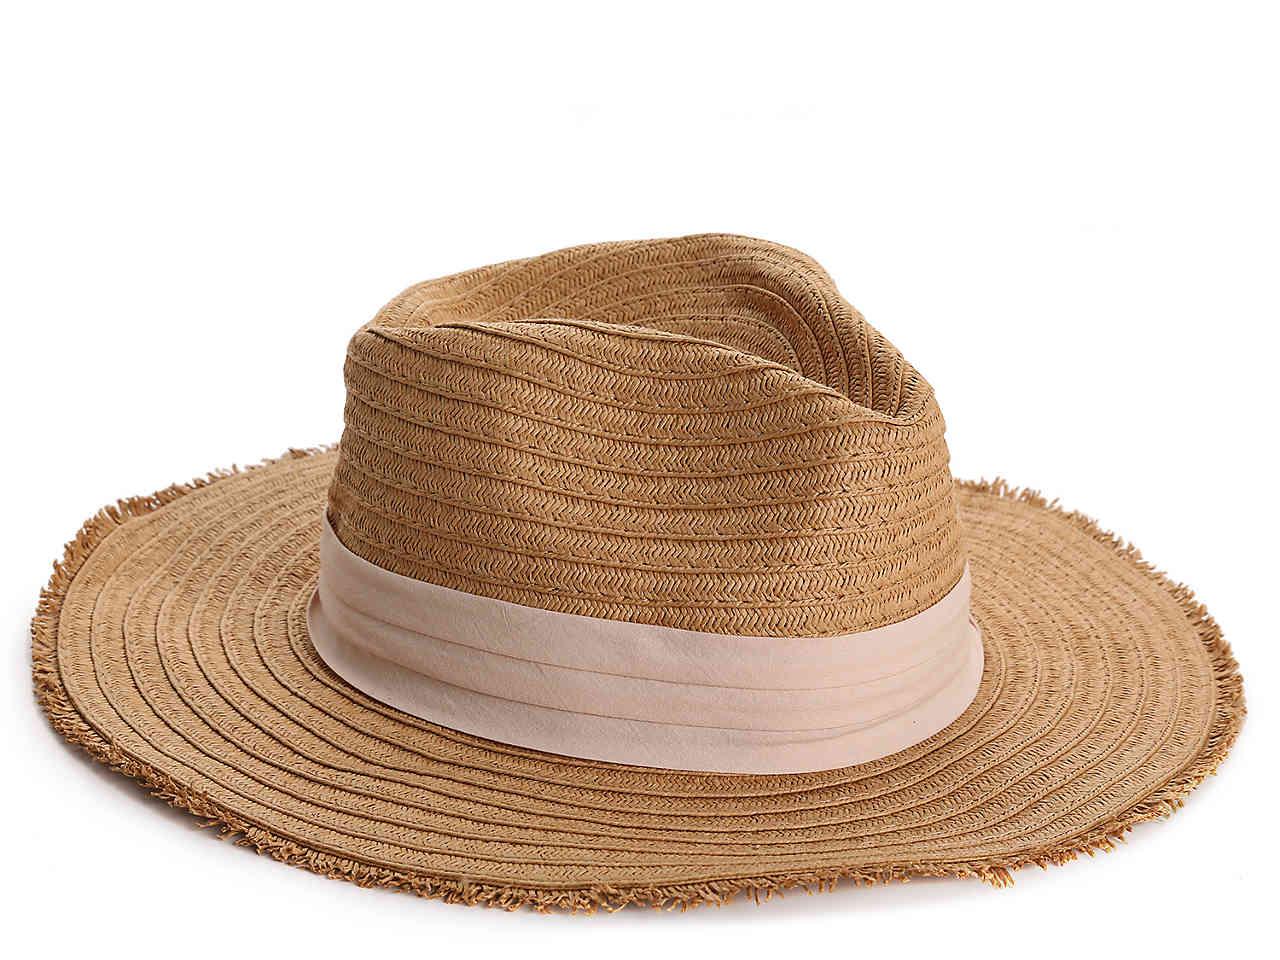 Steve Madden Frayed Edge Panama Hat in Brown - Lyst